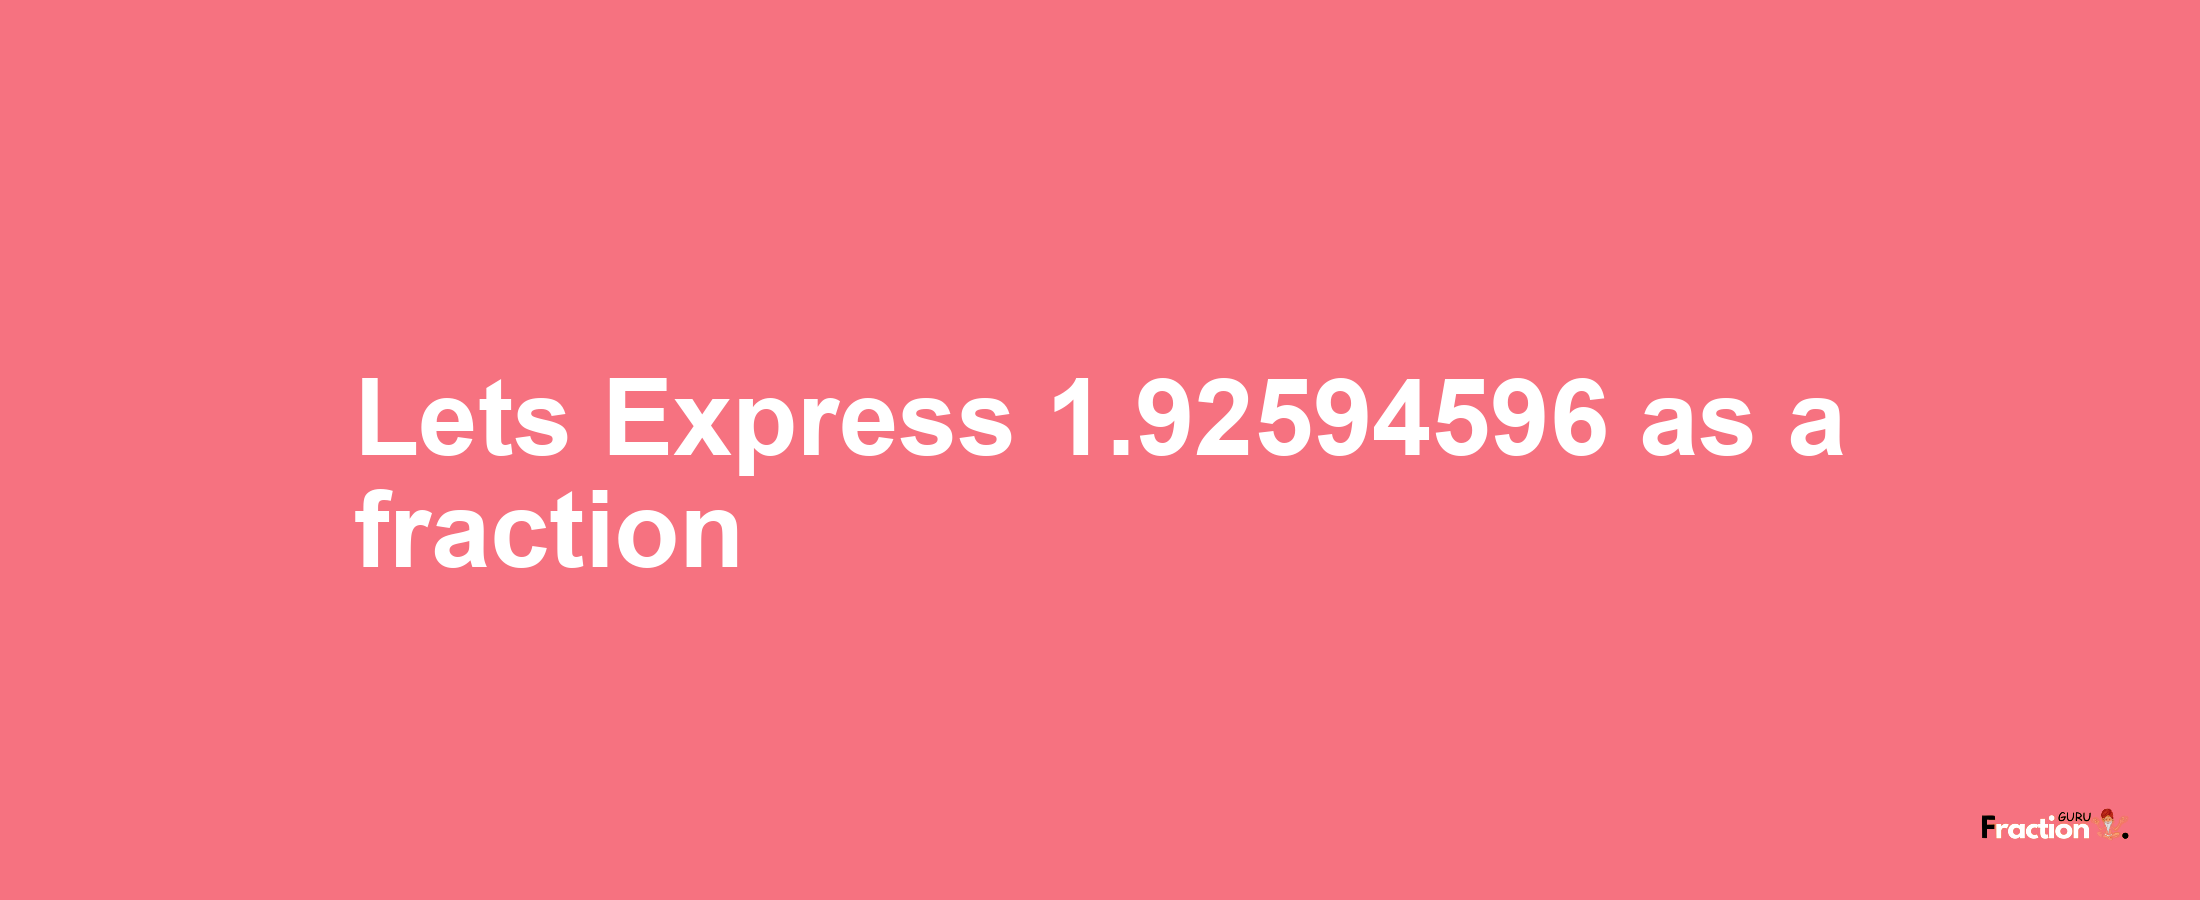 Lets Express 1.92594596 as afraction